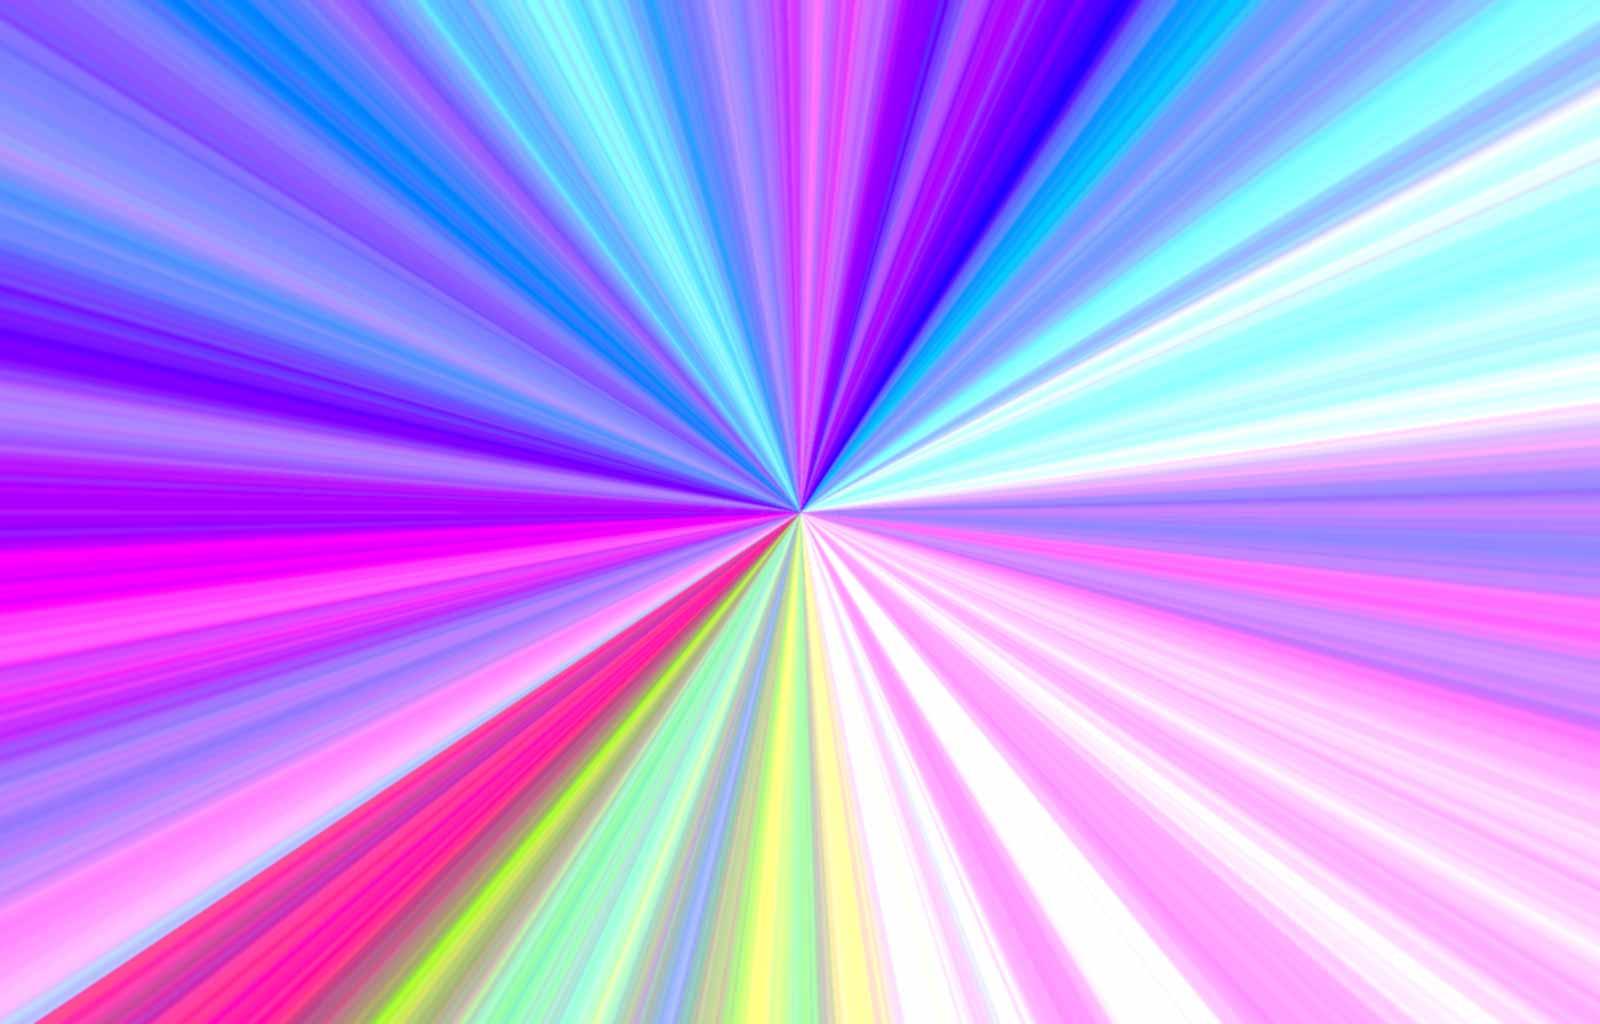 Twitter rainbow starburst jpg - - High Quality and other